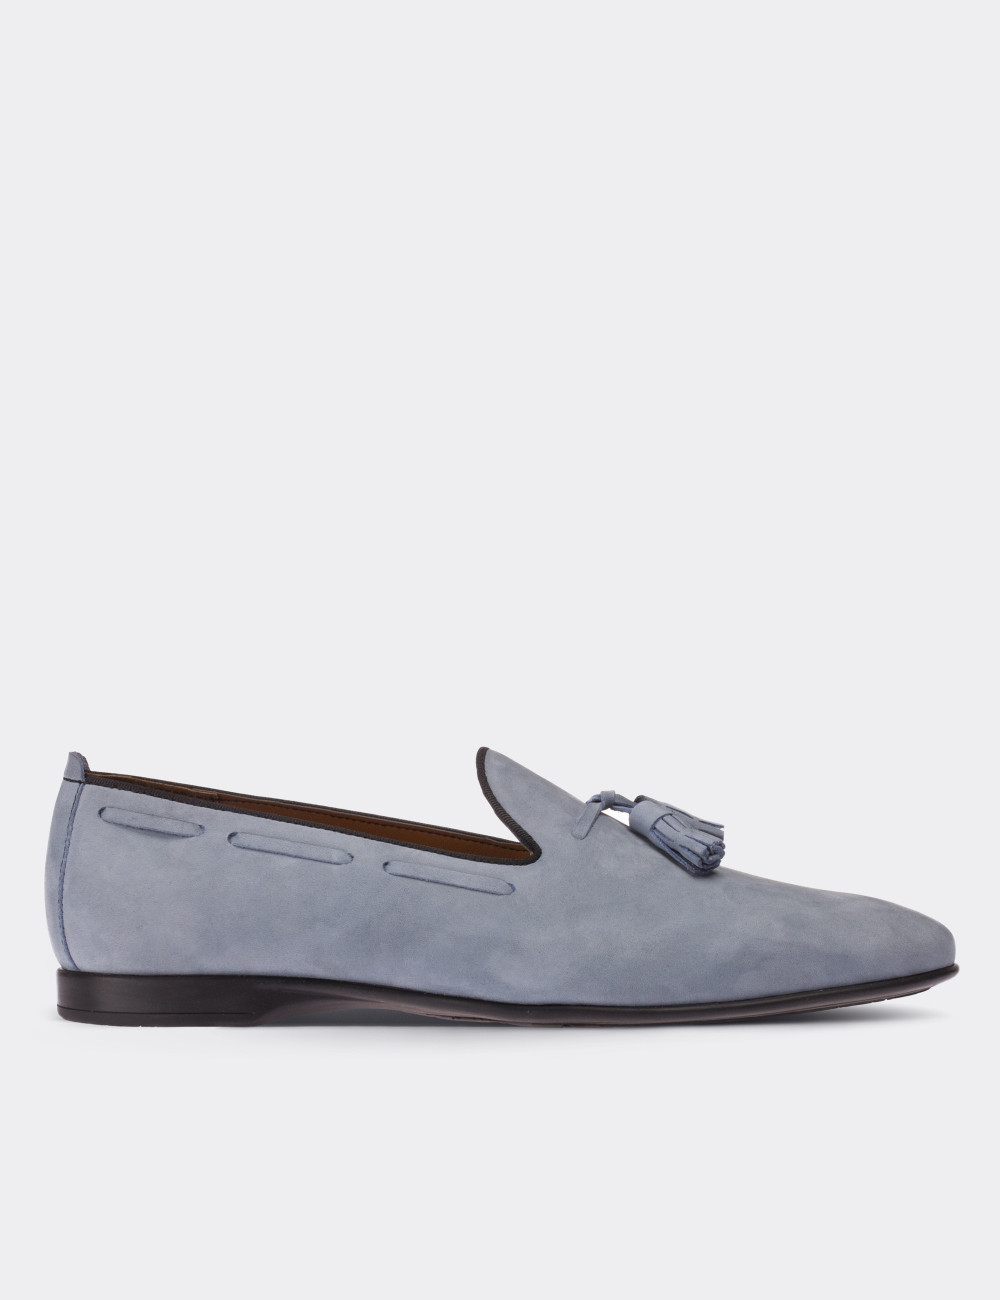 Blue Nubuck Leather Loafers - 01643MMVIC01